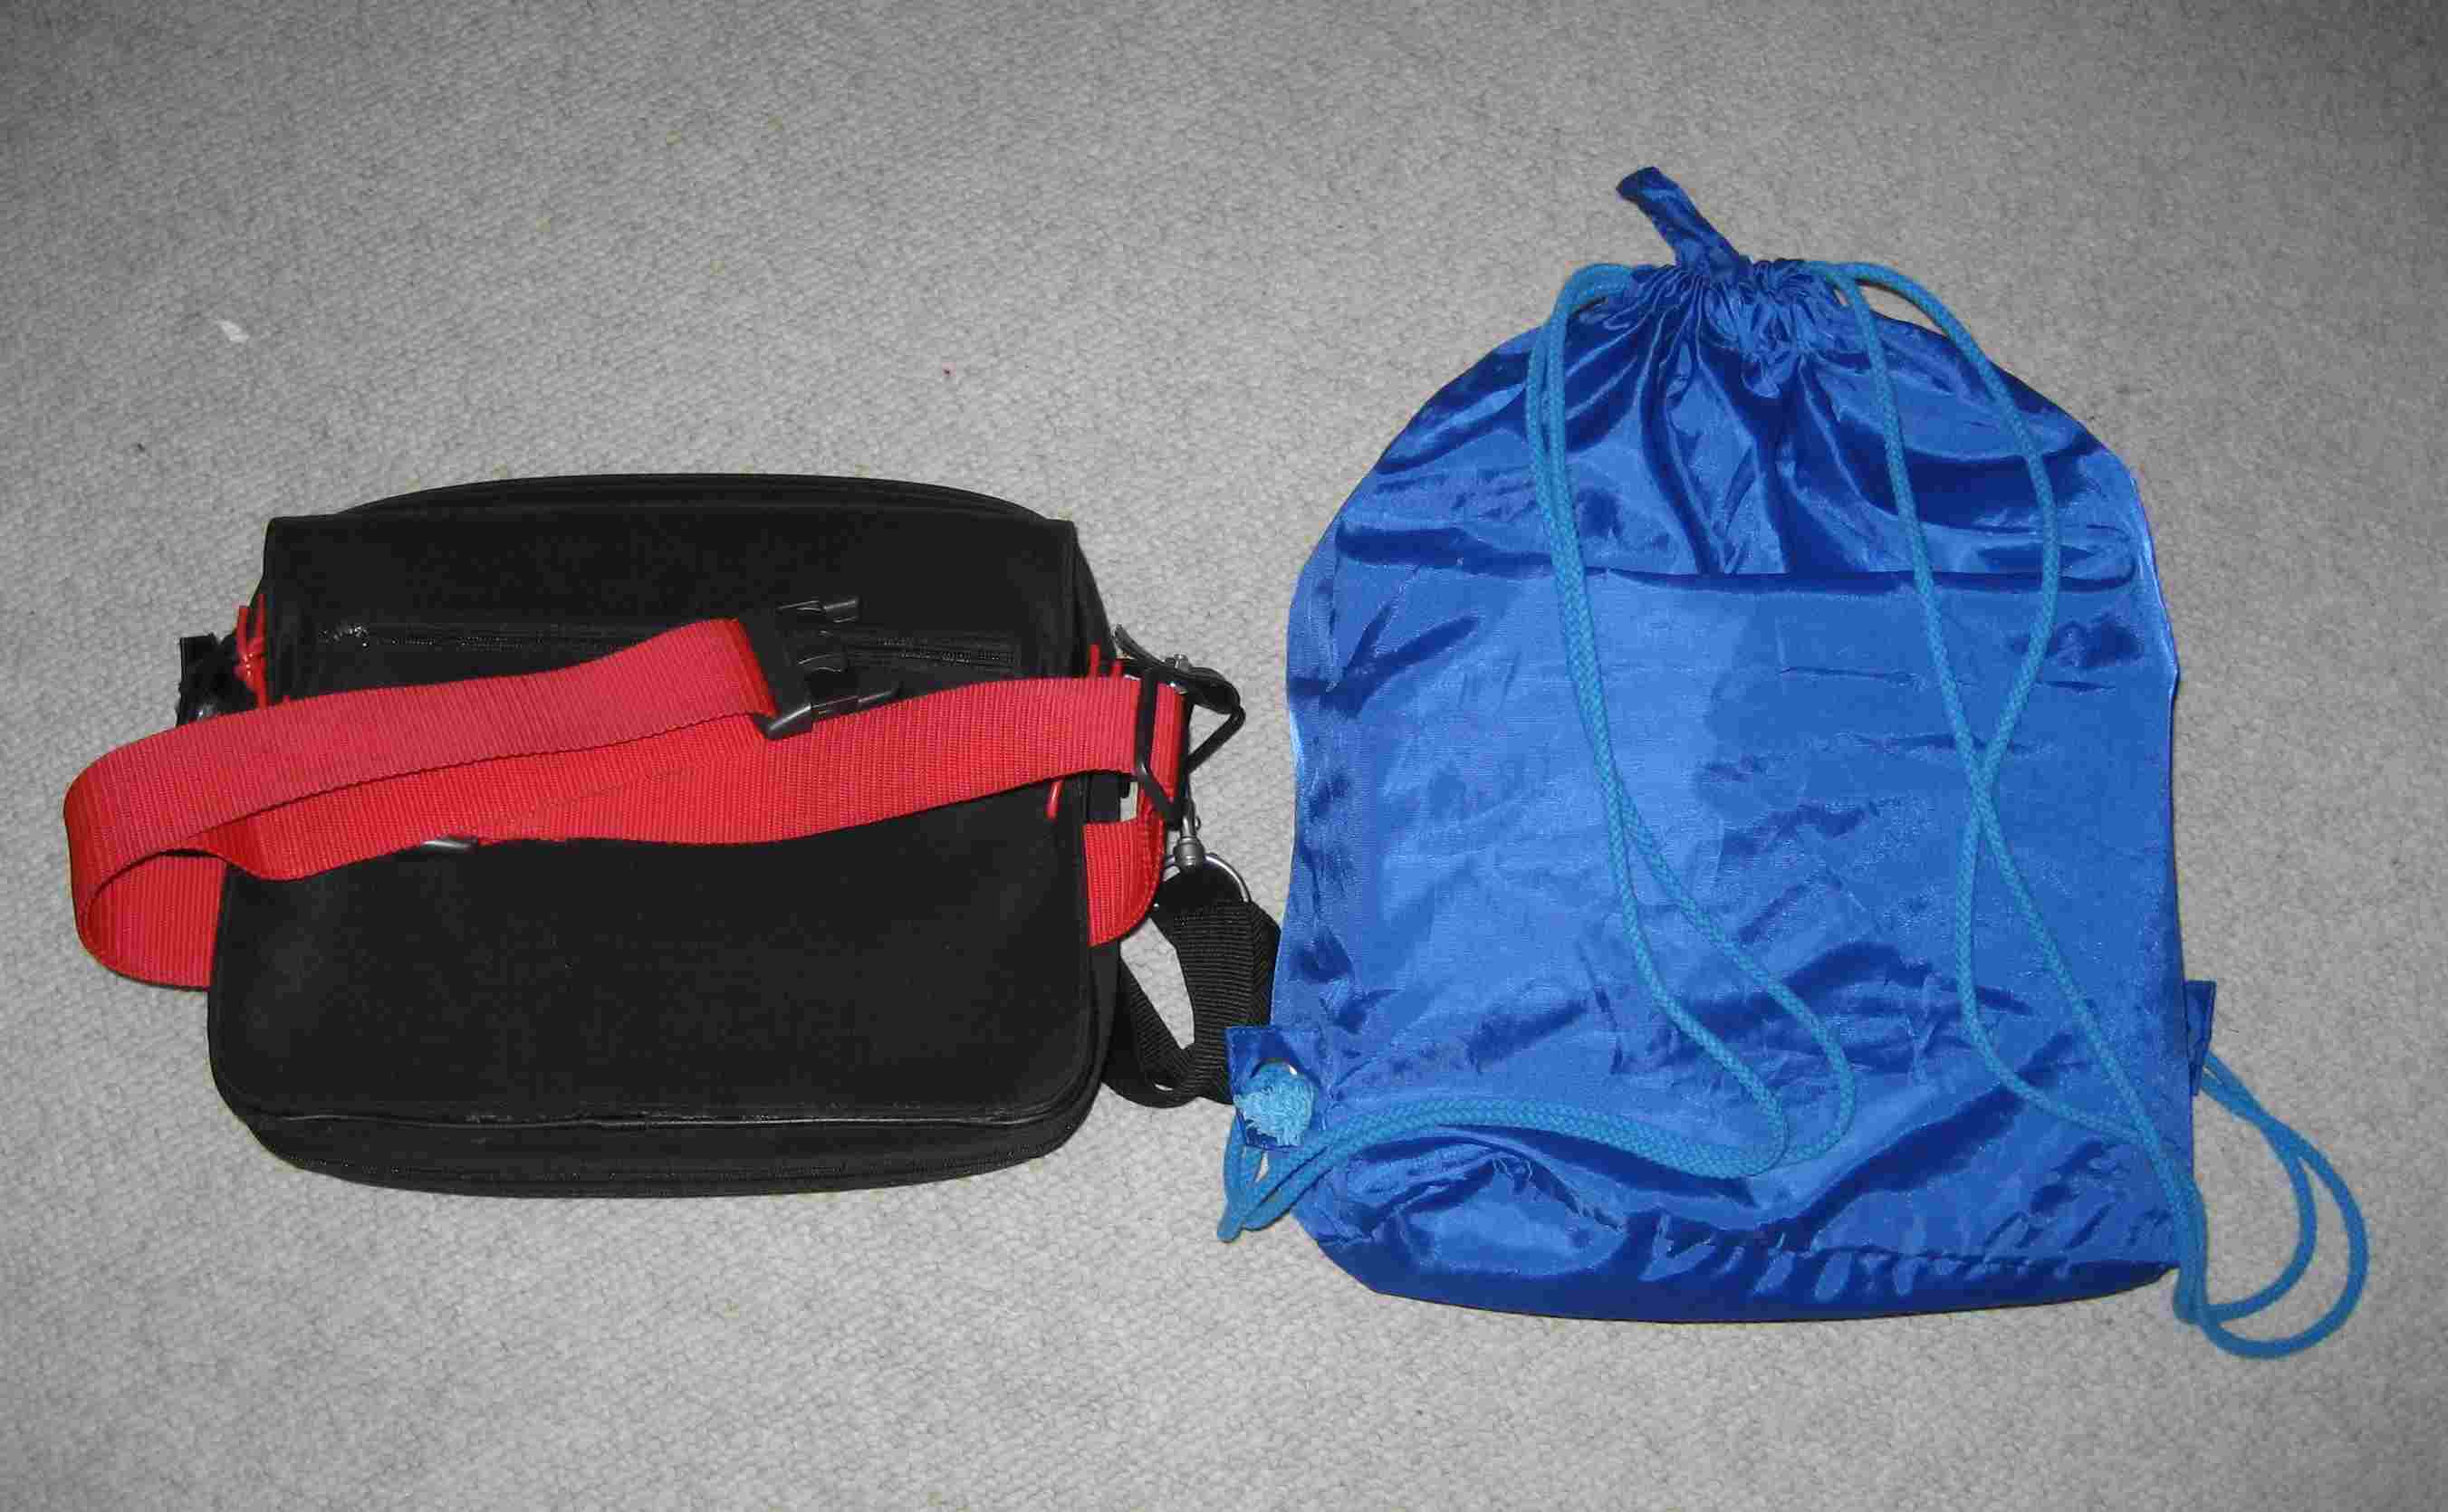 Bellypack and drawstring